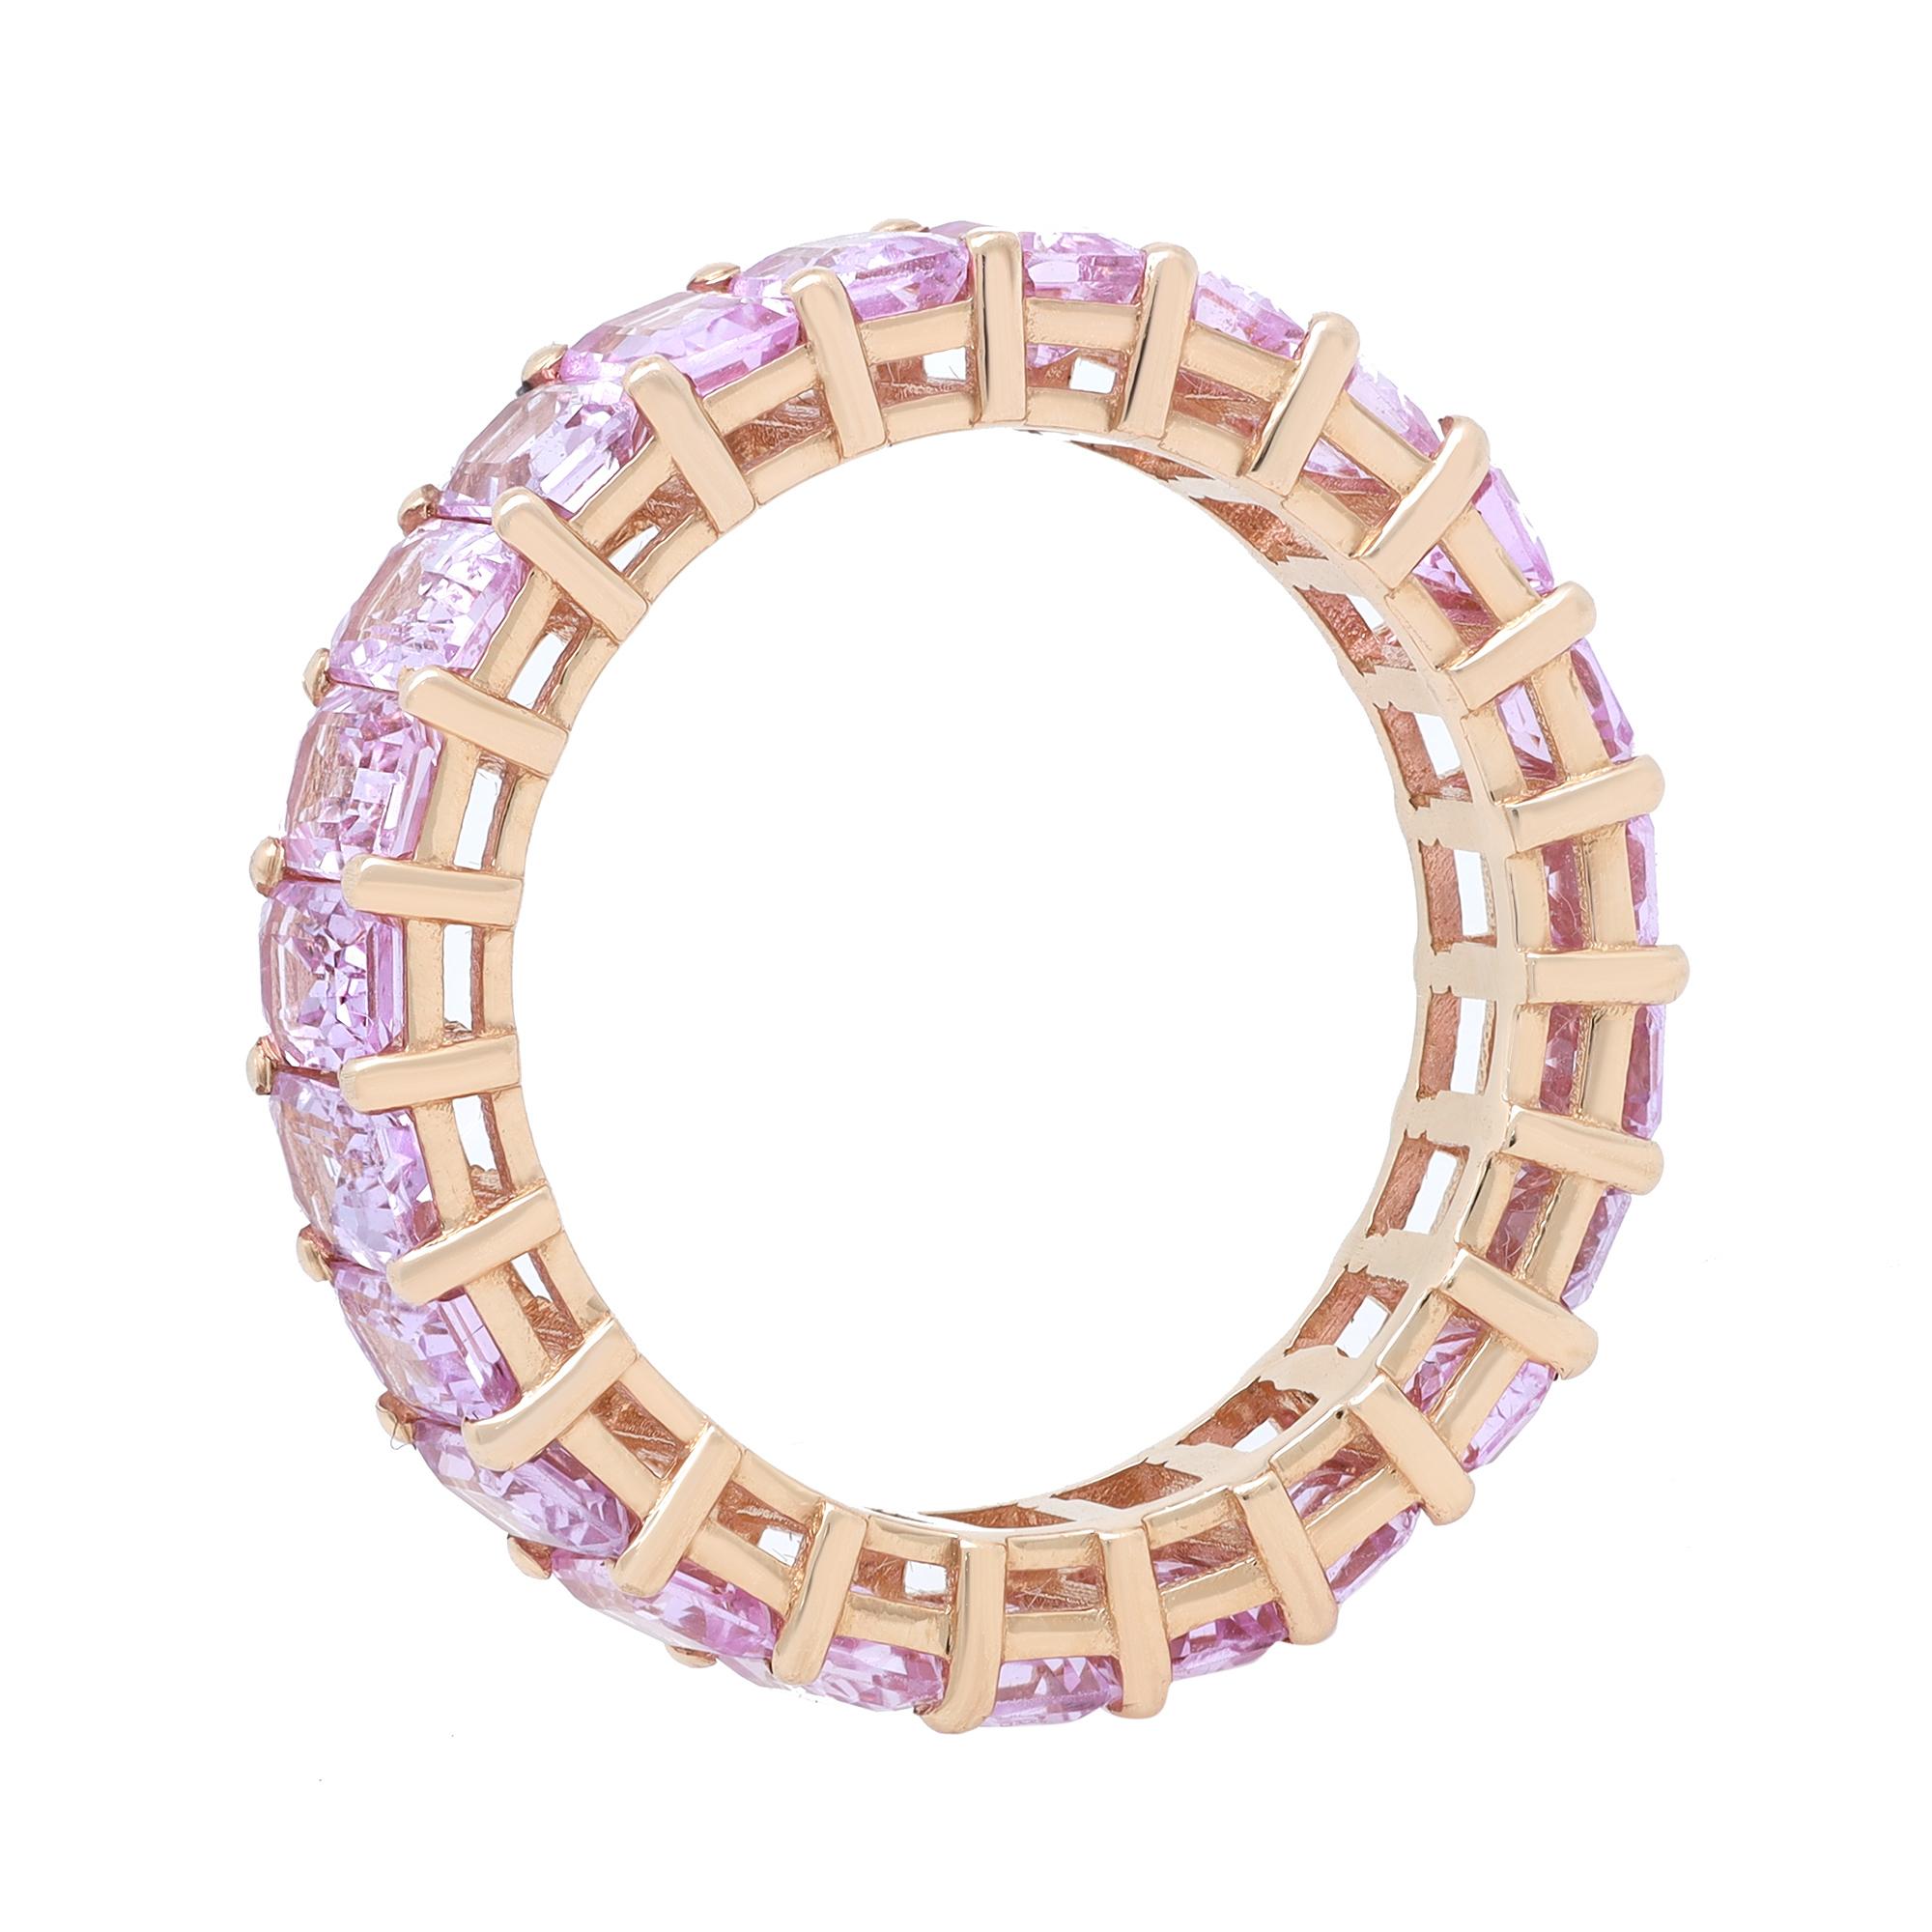 A sweet token of eternal love to your beloved. This exquisite Pink Sapphire eternity band ring is crafted in fine 14K yellow gold. It features 23 prong set Emerald cut Pink Sapphires weighing 6.12 carats. With their medium and vivid tone, the